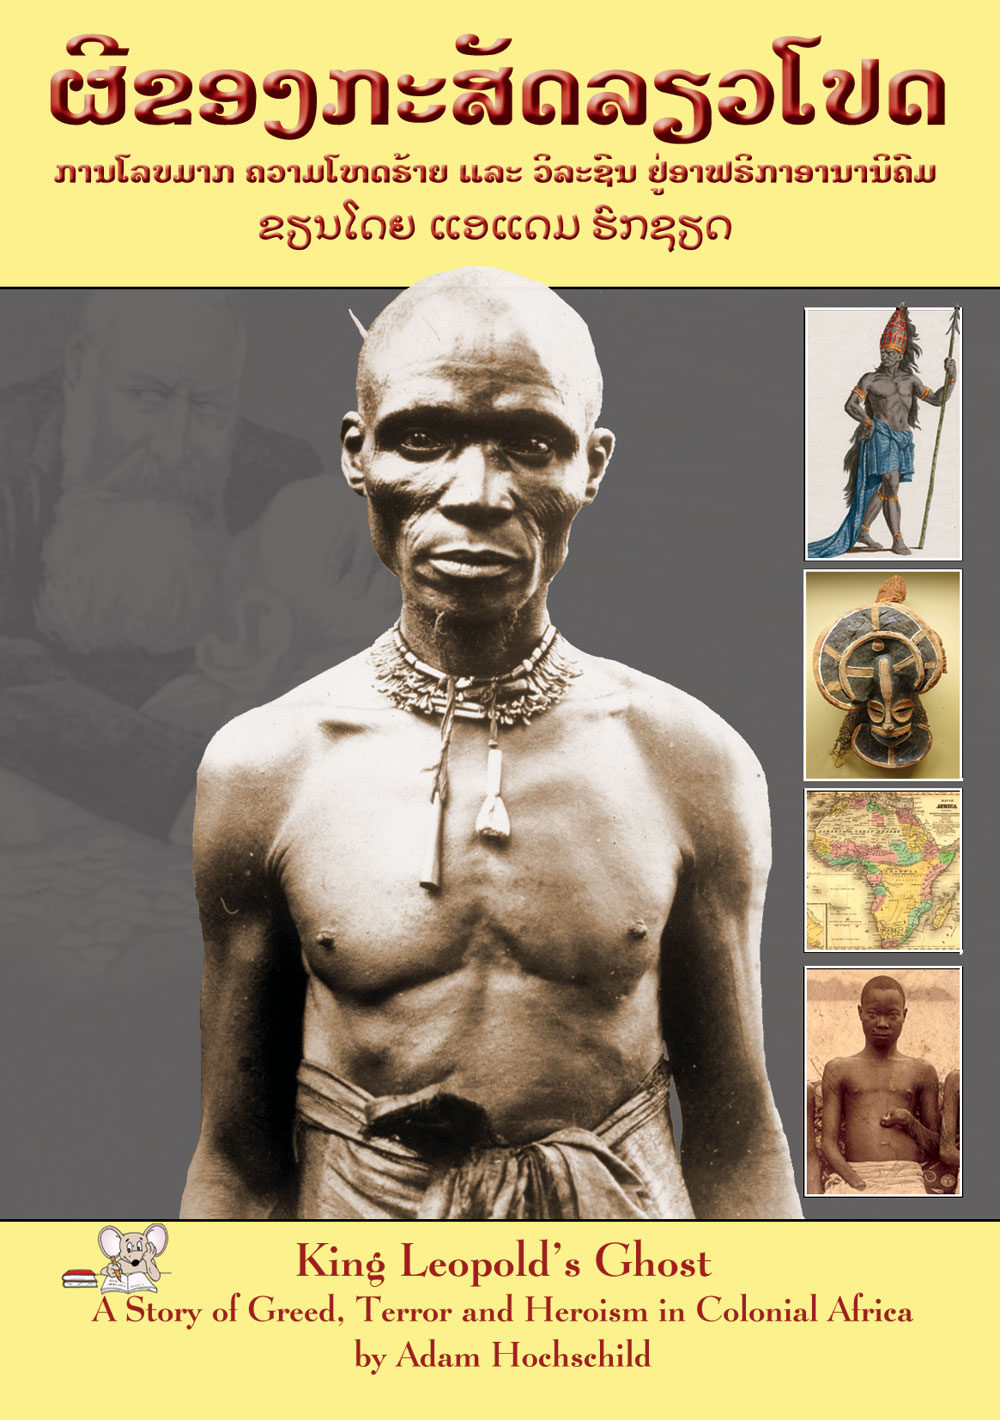 King Leopold's Ghost large book cover, published in Lao language